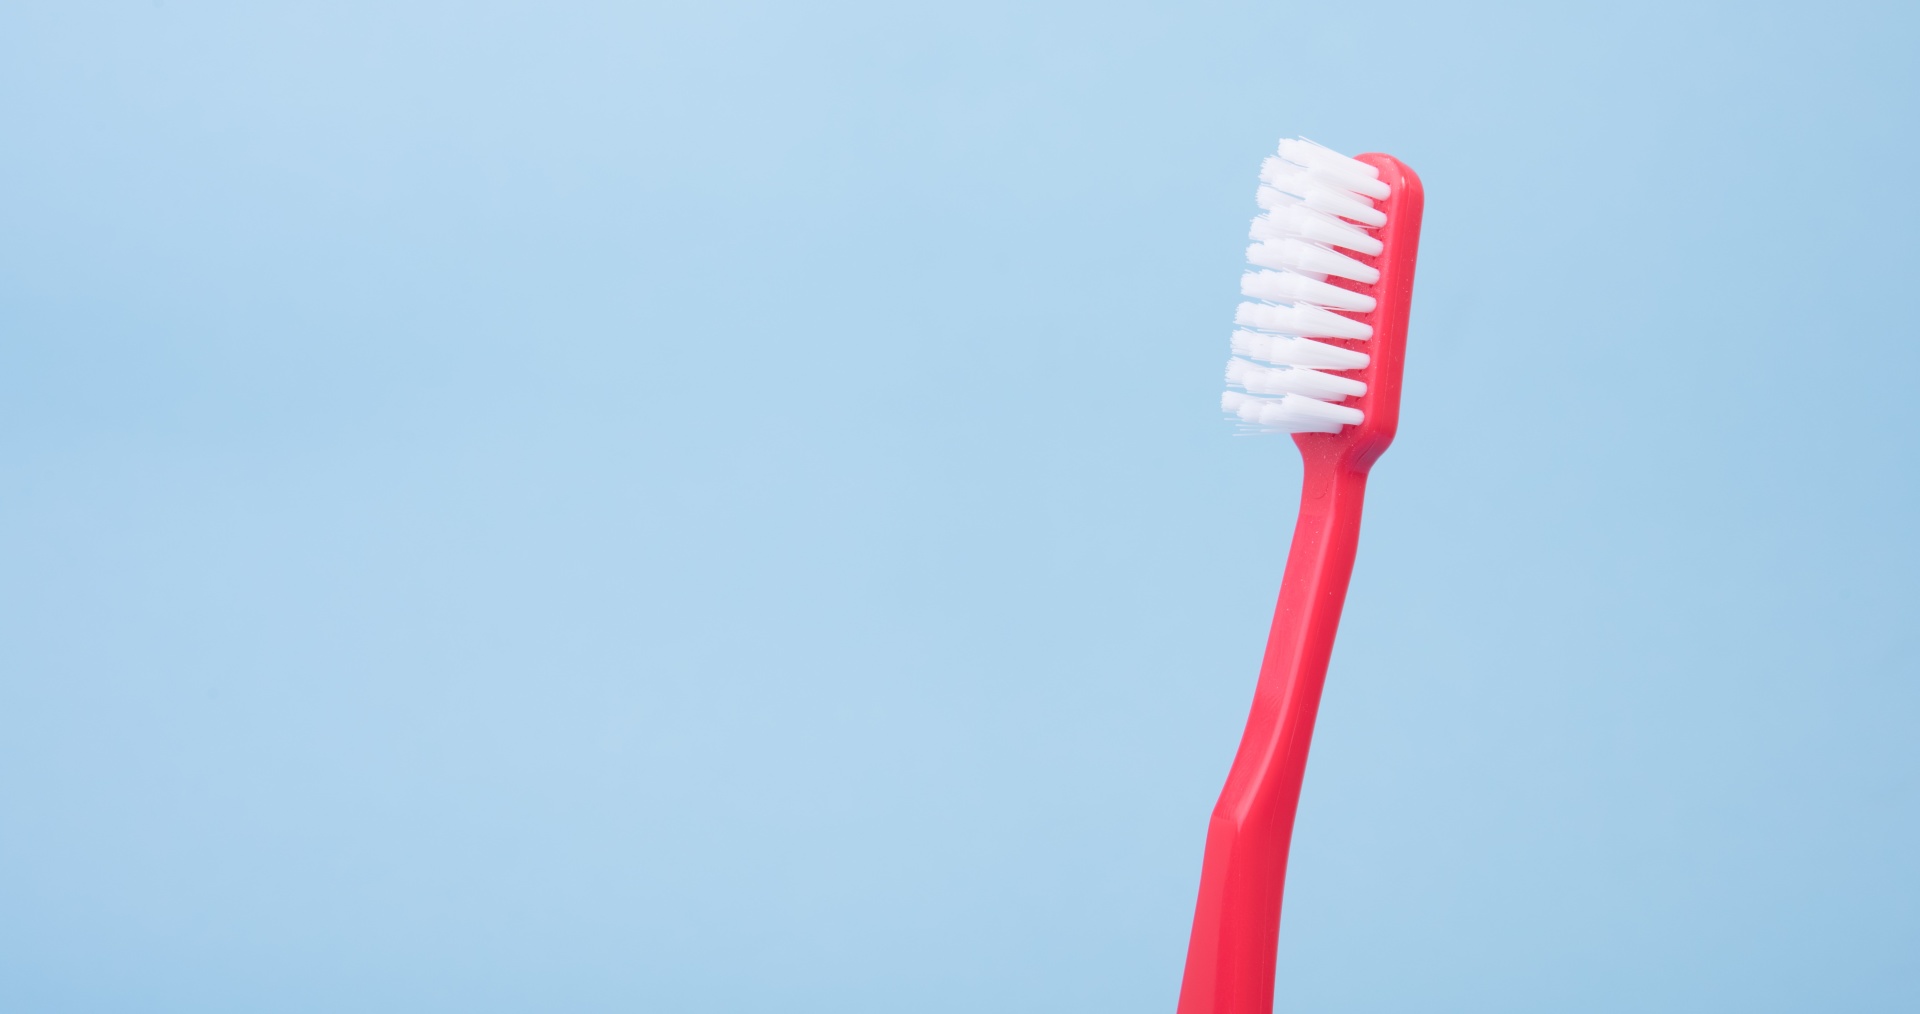 A red toothbrush with white bristles stands tall and straight against a light blue background